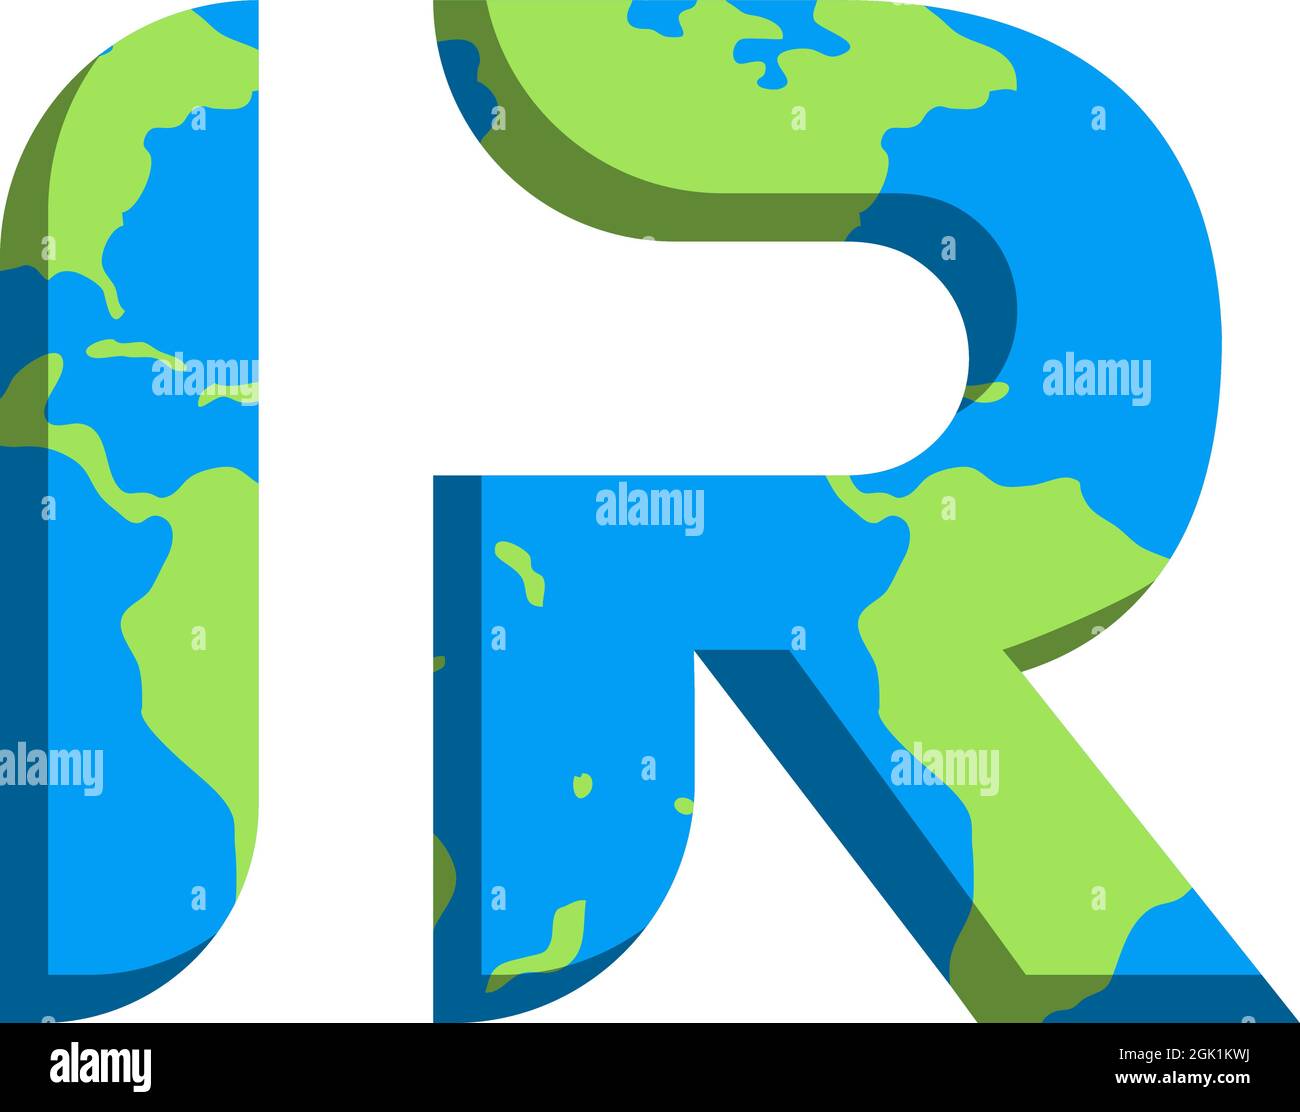 Initial IR logo design with World Map style, Logo business branding. Stock Vector